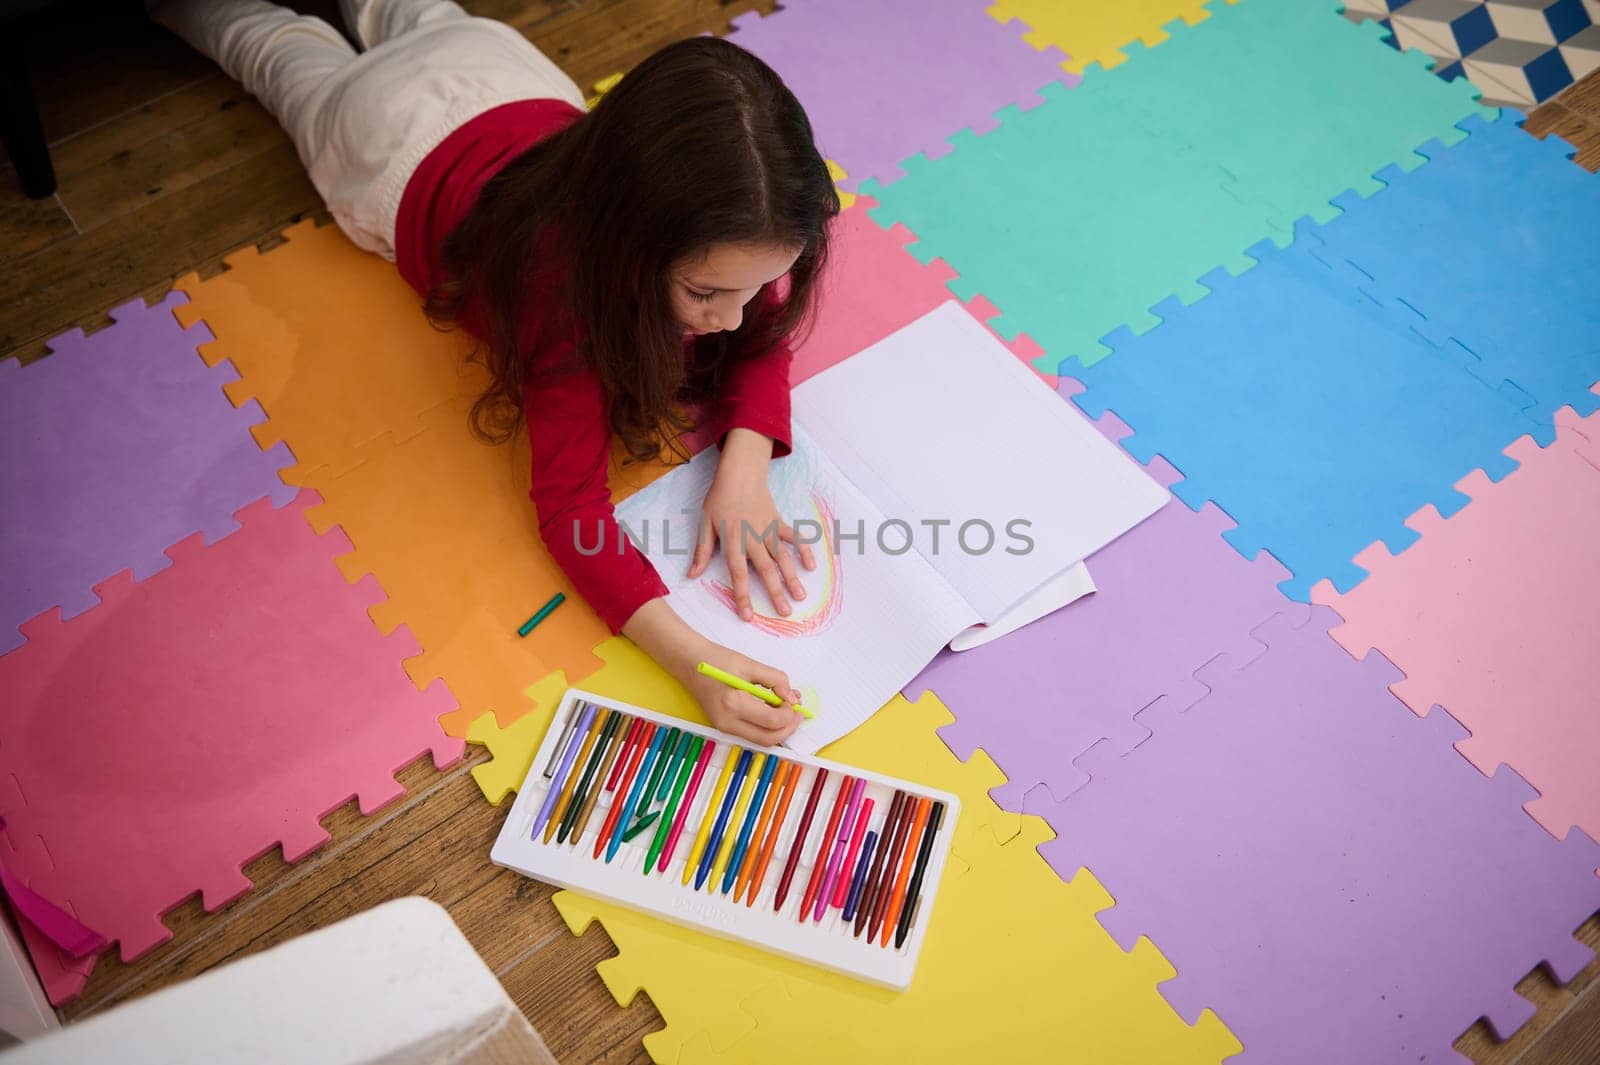 Overhead view of a talented little child, school girl taking out colorful pencil from pencil case, drawing beautiful cloud with rainbow, lying on a multi colored puzzle carpet in cozy home interior.